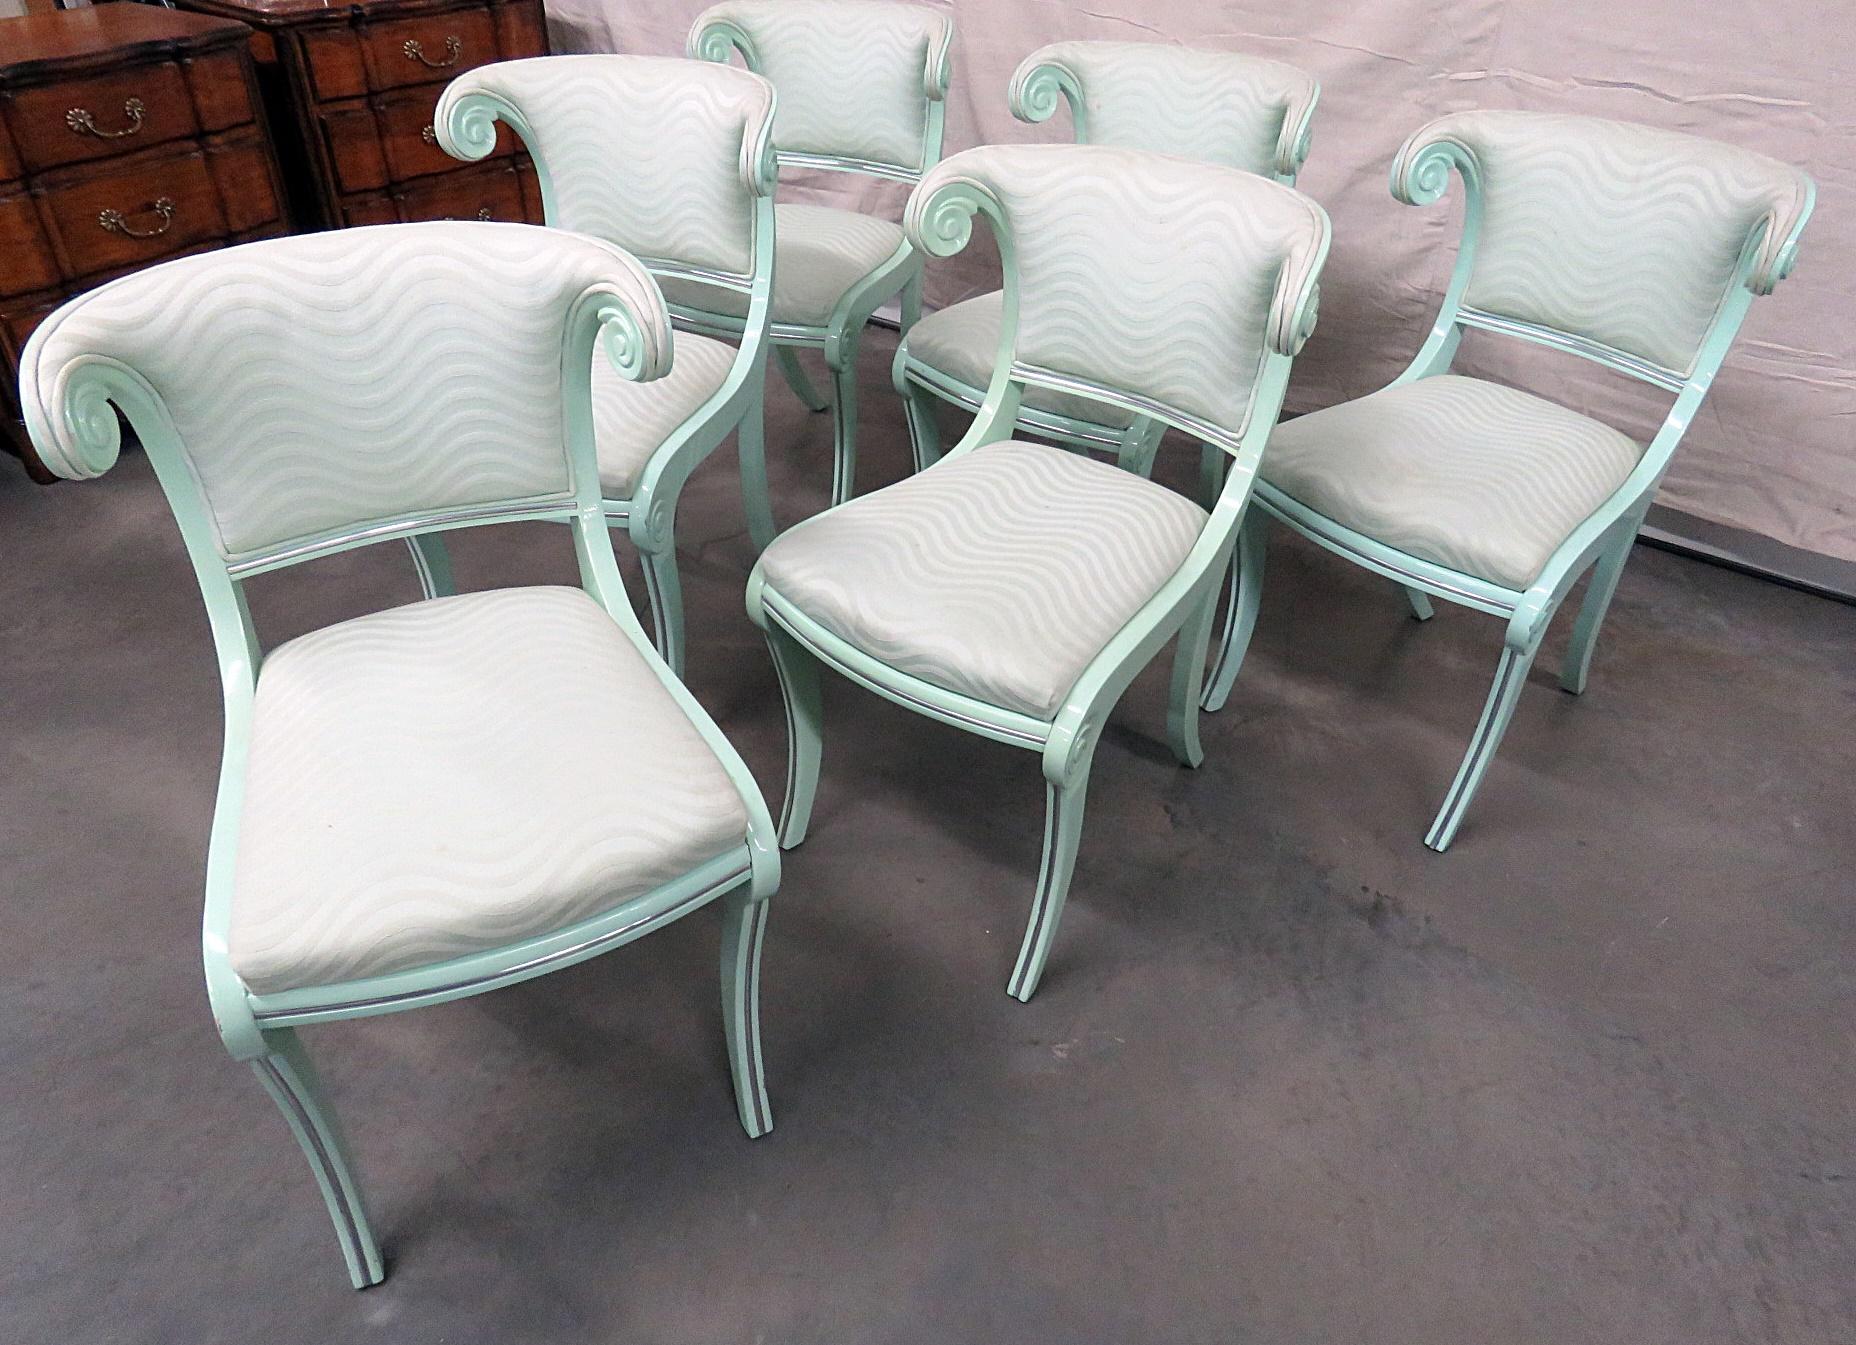 This is a very unique set of dining chairs. Designed in the English Regency manner however with a unique twist of chrome details, these chairs have a traditional feel but with a modern touch. They are perfect for a setting that needs a little of